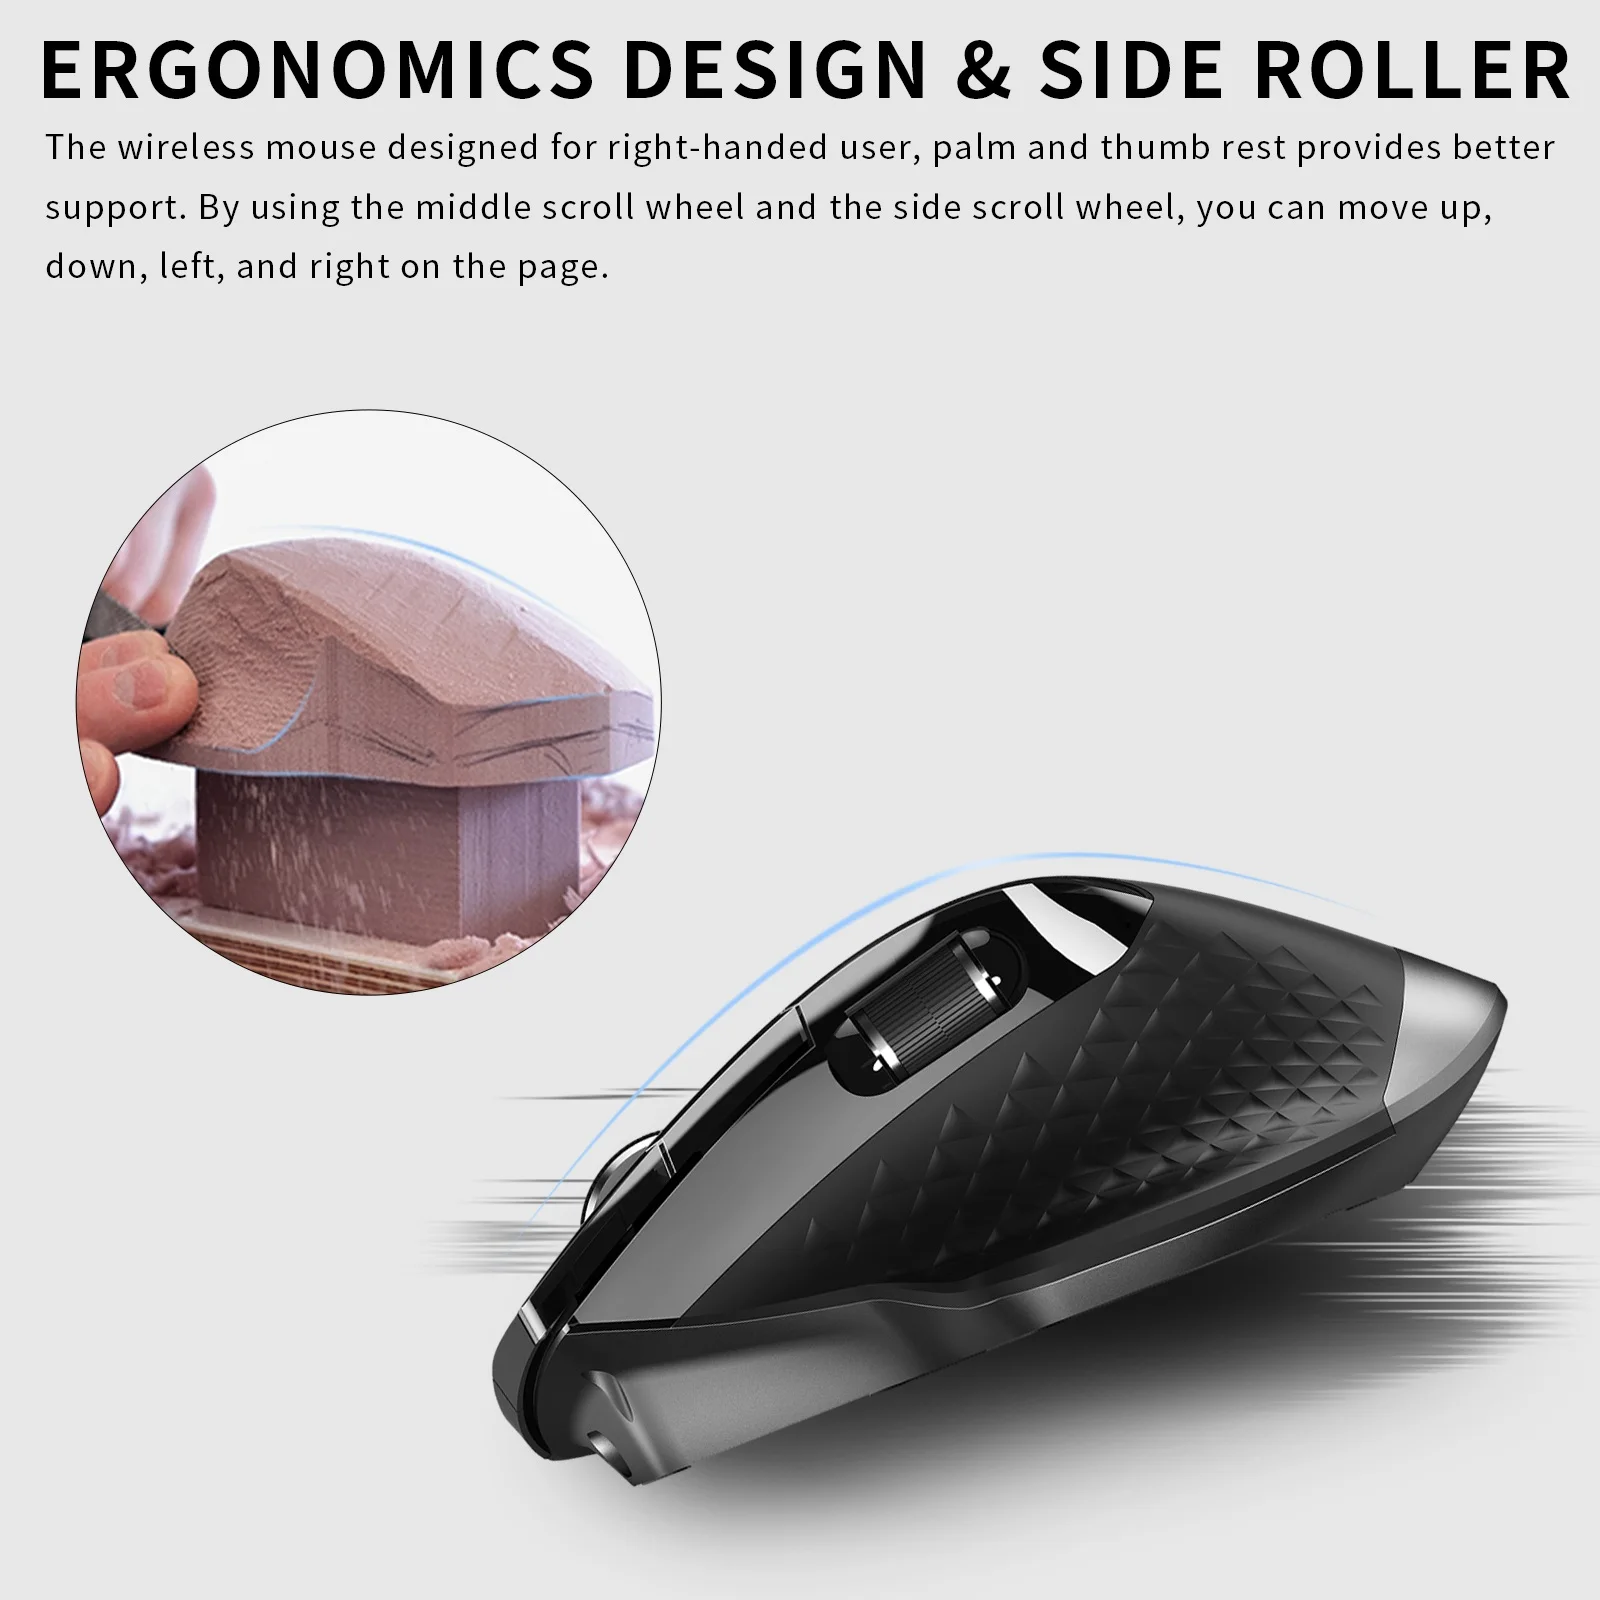 Rapoo MT750 Multi-mode Rechargeable Wireless Mouse Ergonomic 3200 DPI Bluetooth Mouse Easy-Switch Up to 4 Devices Gaming Mouse images - 6